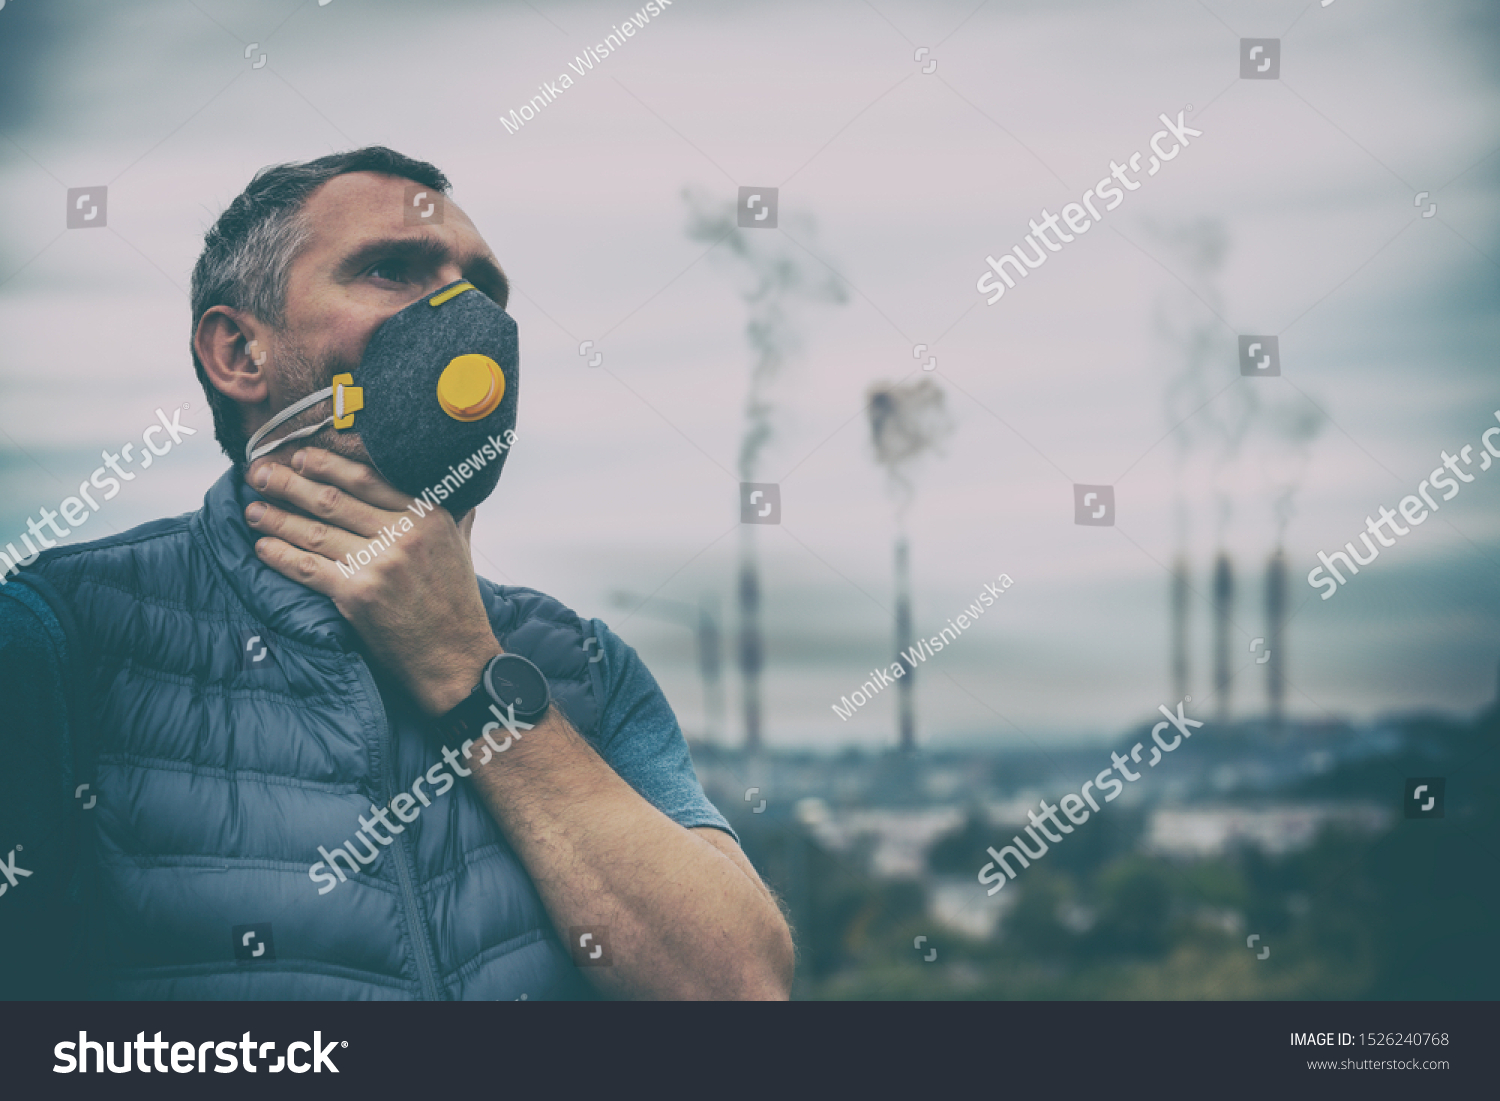 Man wearing a real anti-pollution, anti-smog and viruses face mask; dense smog in air. #1526240768